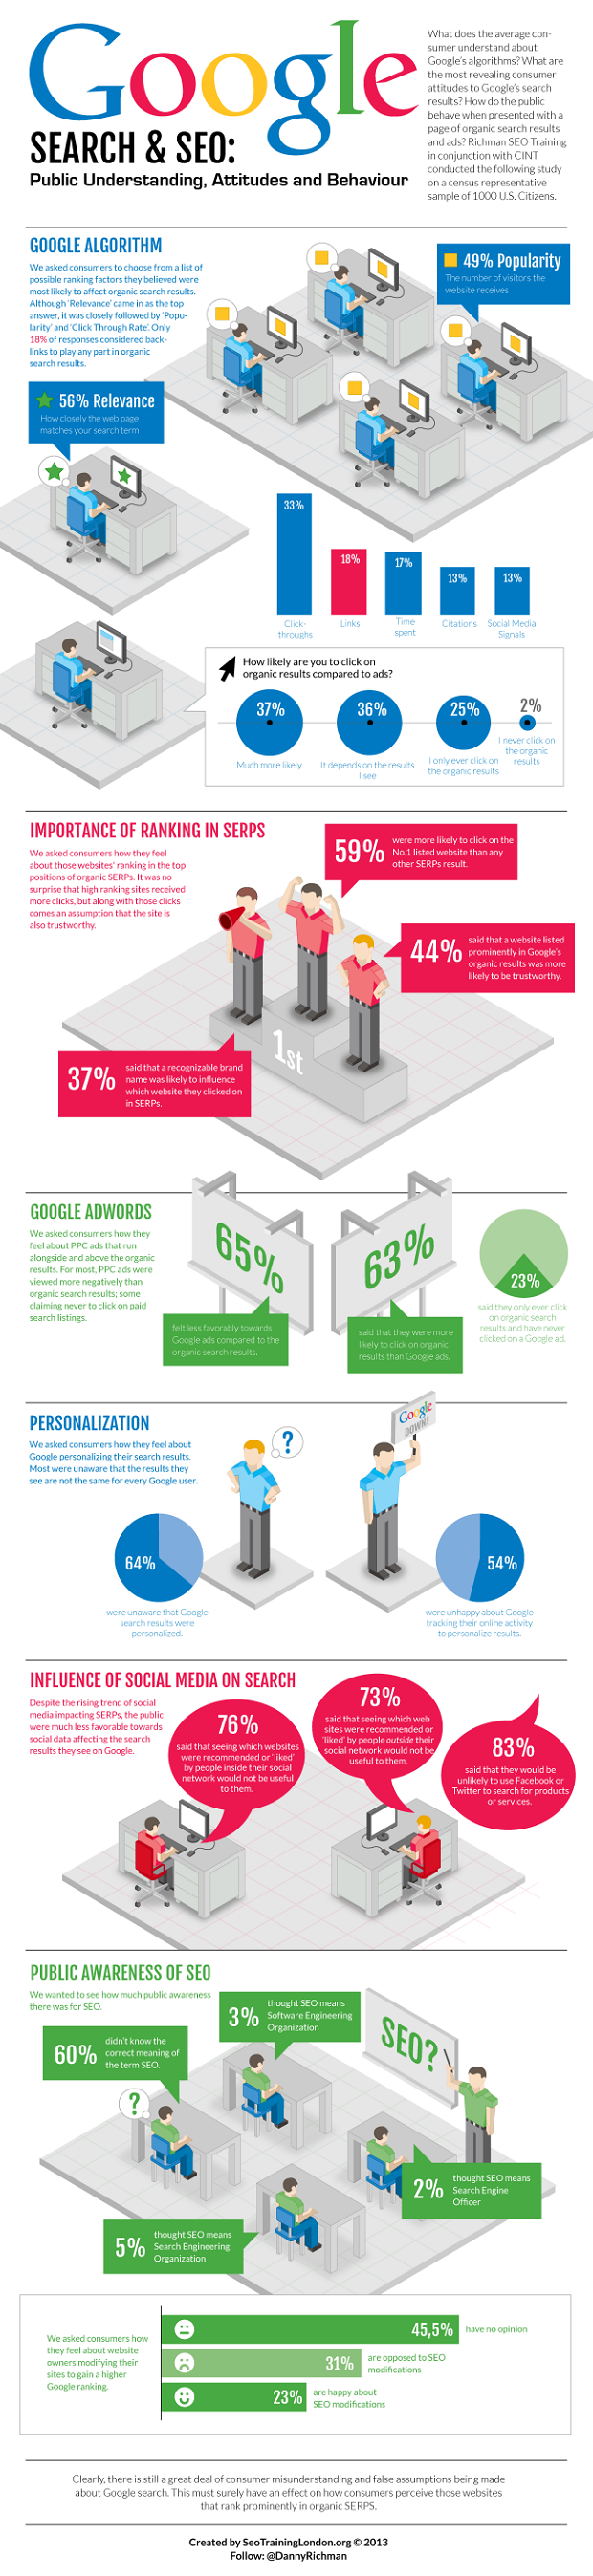 Infographic of the Day: Google Search & SEO - How Does an Average Consumer Reacts to It?